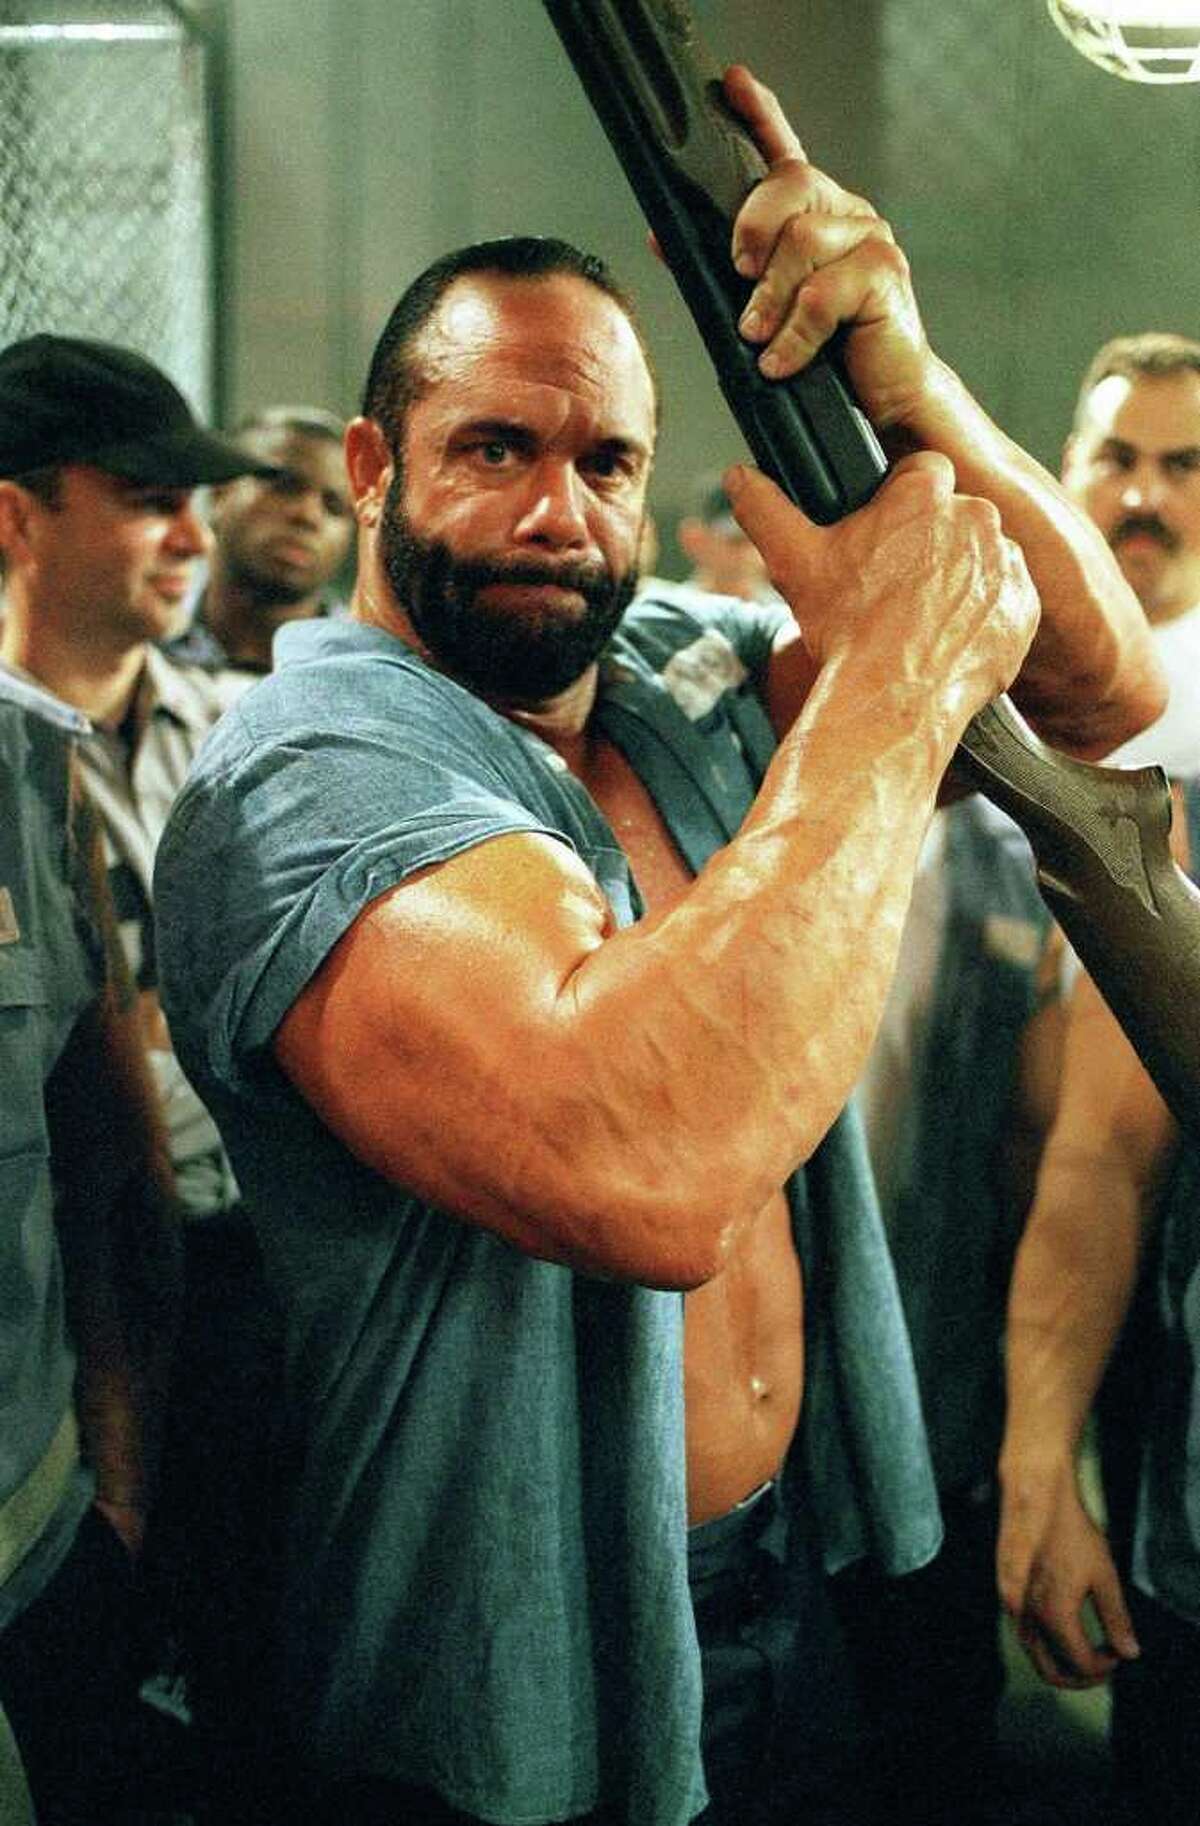 Randy Savage guest stars as Wide Load Lunt, a convict forced to participate in brutal fights between prisoners that are staged by guards, on WALKER, TEXAS RANGER, Saturday, Nov. 20.